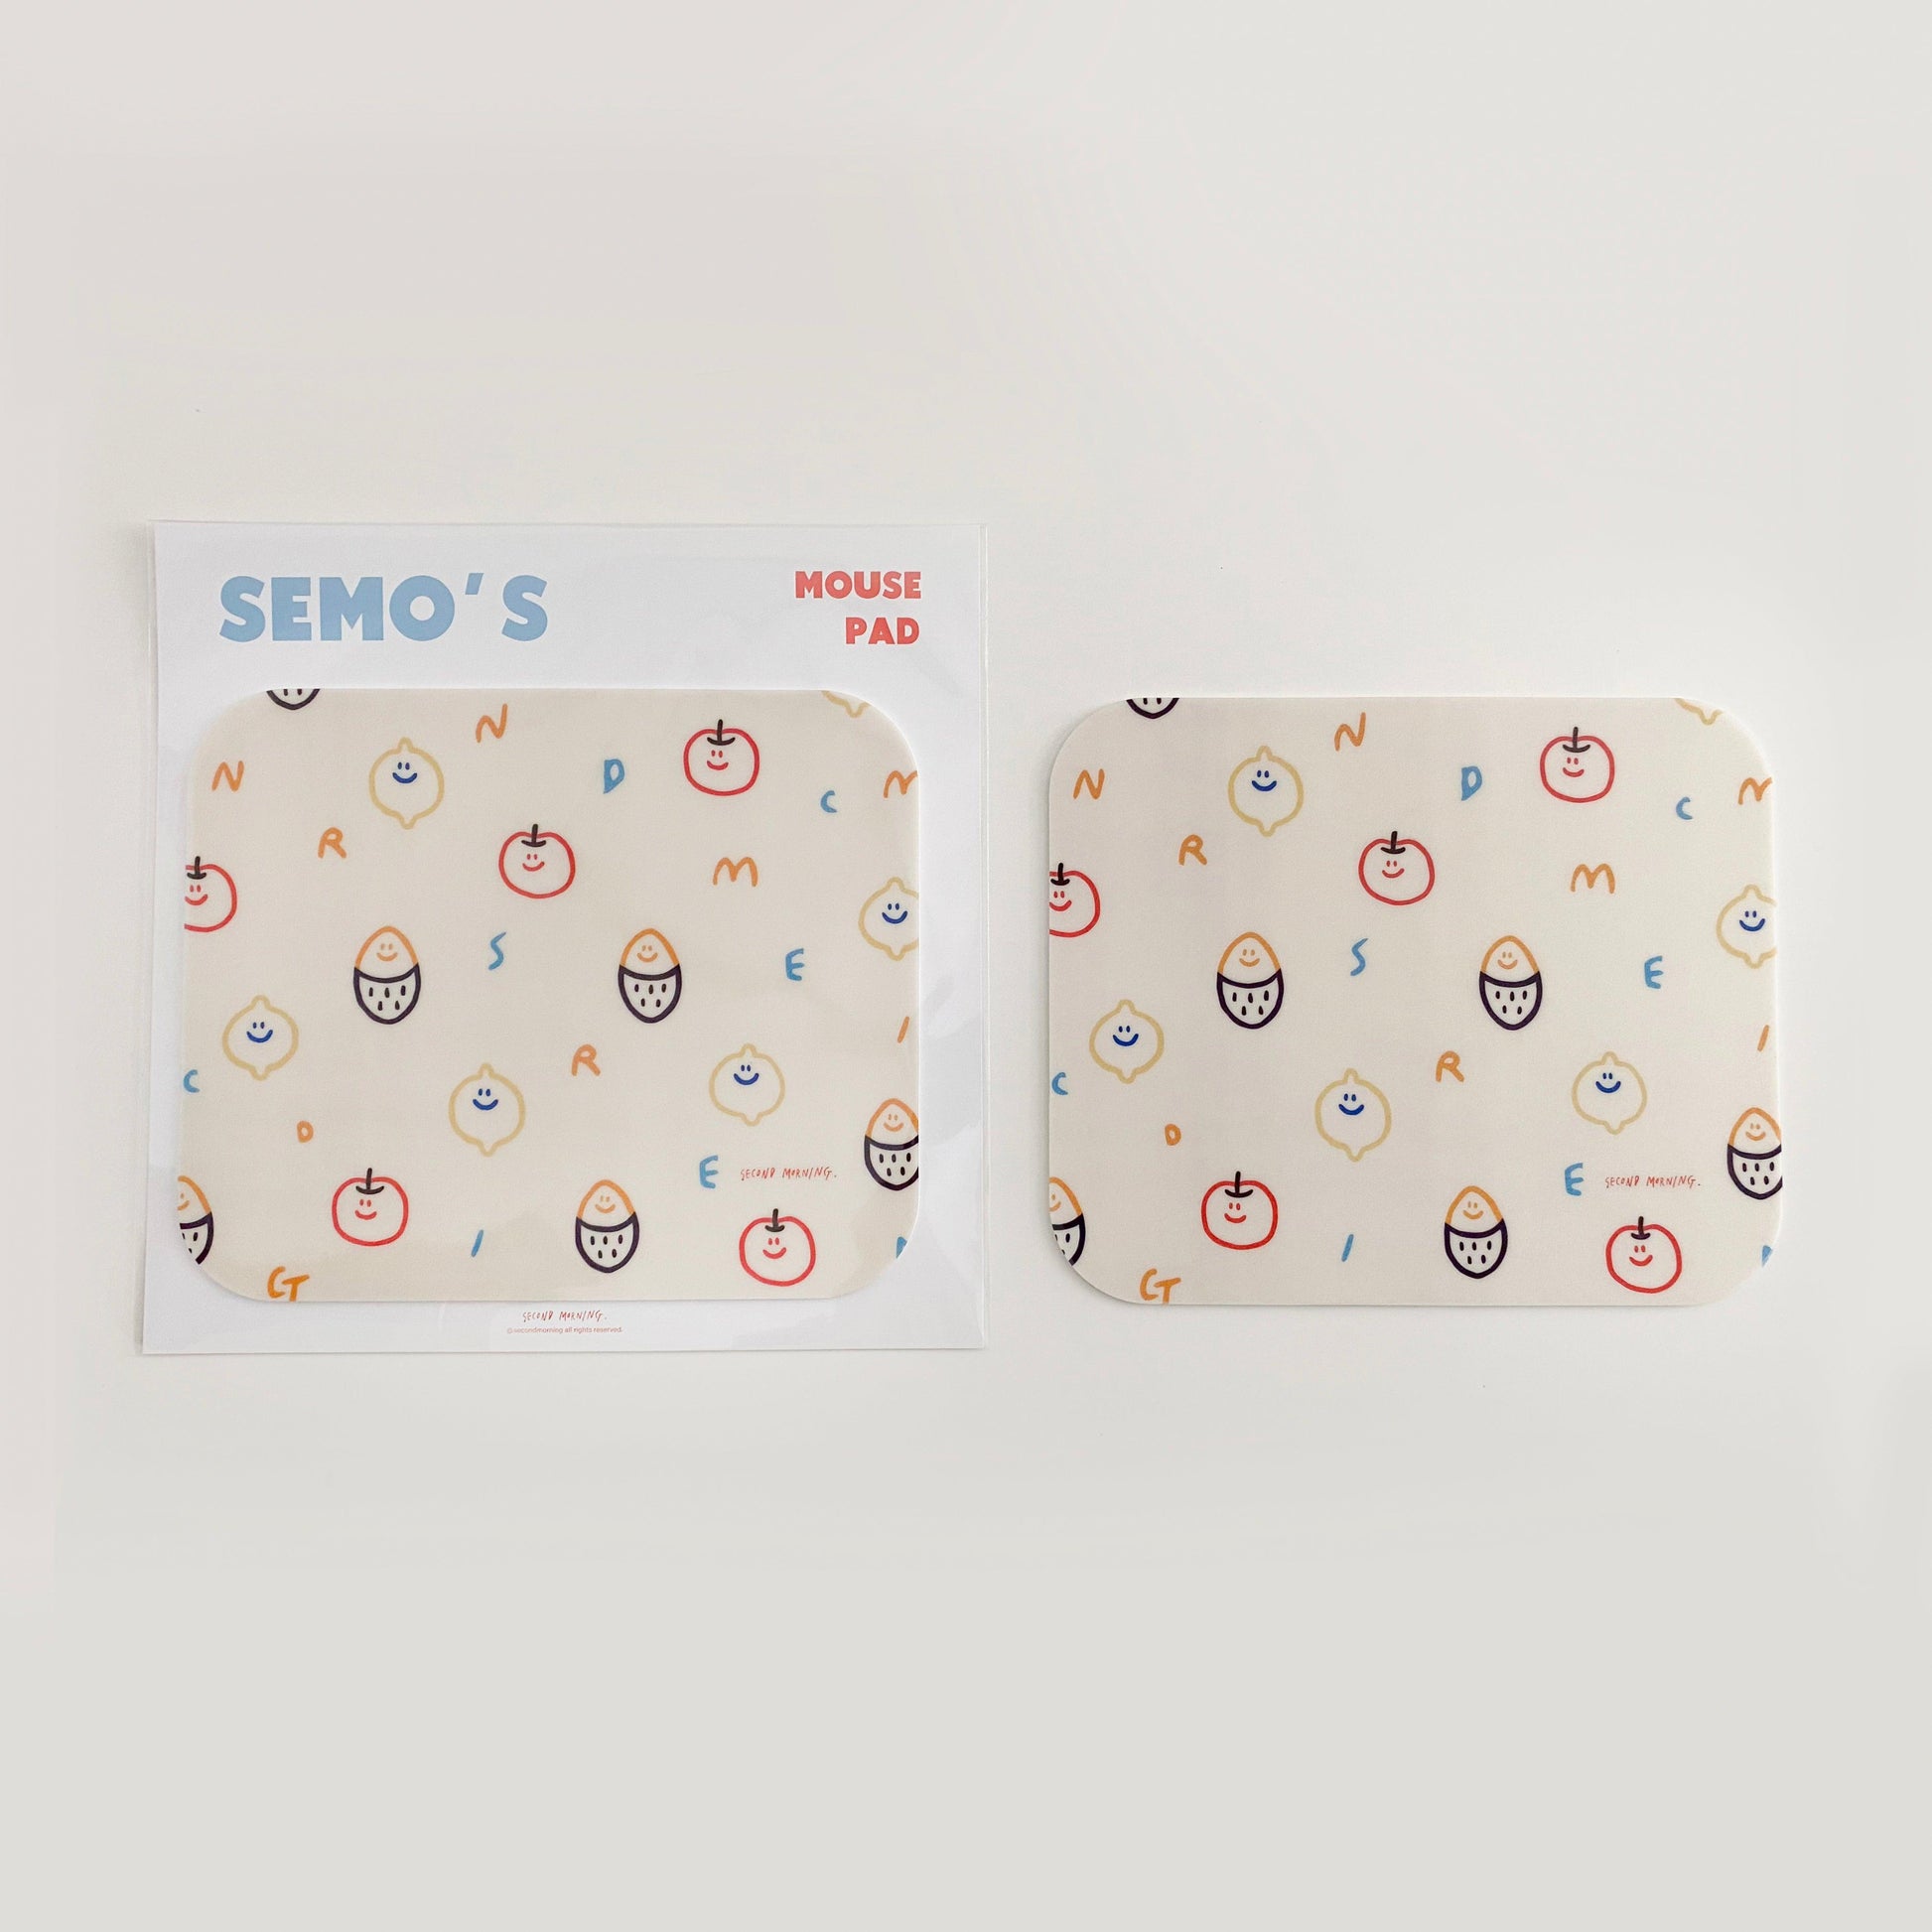 Second Morning Semo Friends Mouse Pad 滑鼠墊 - SOUL SIMPLE HK